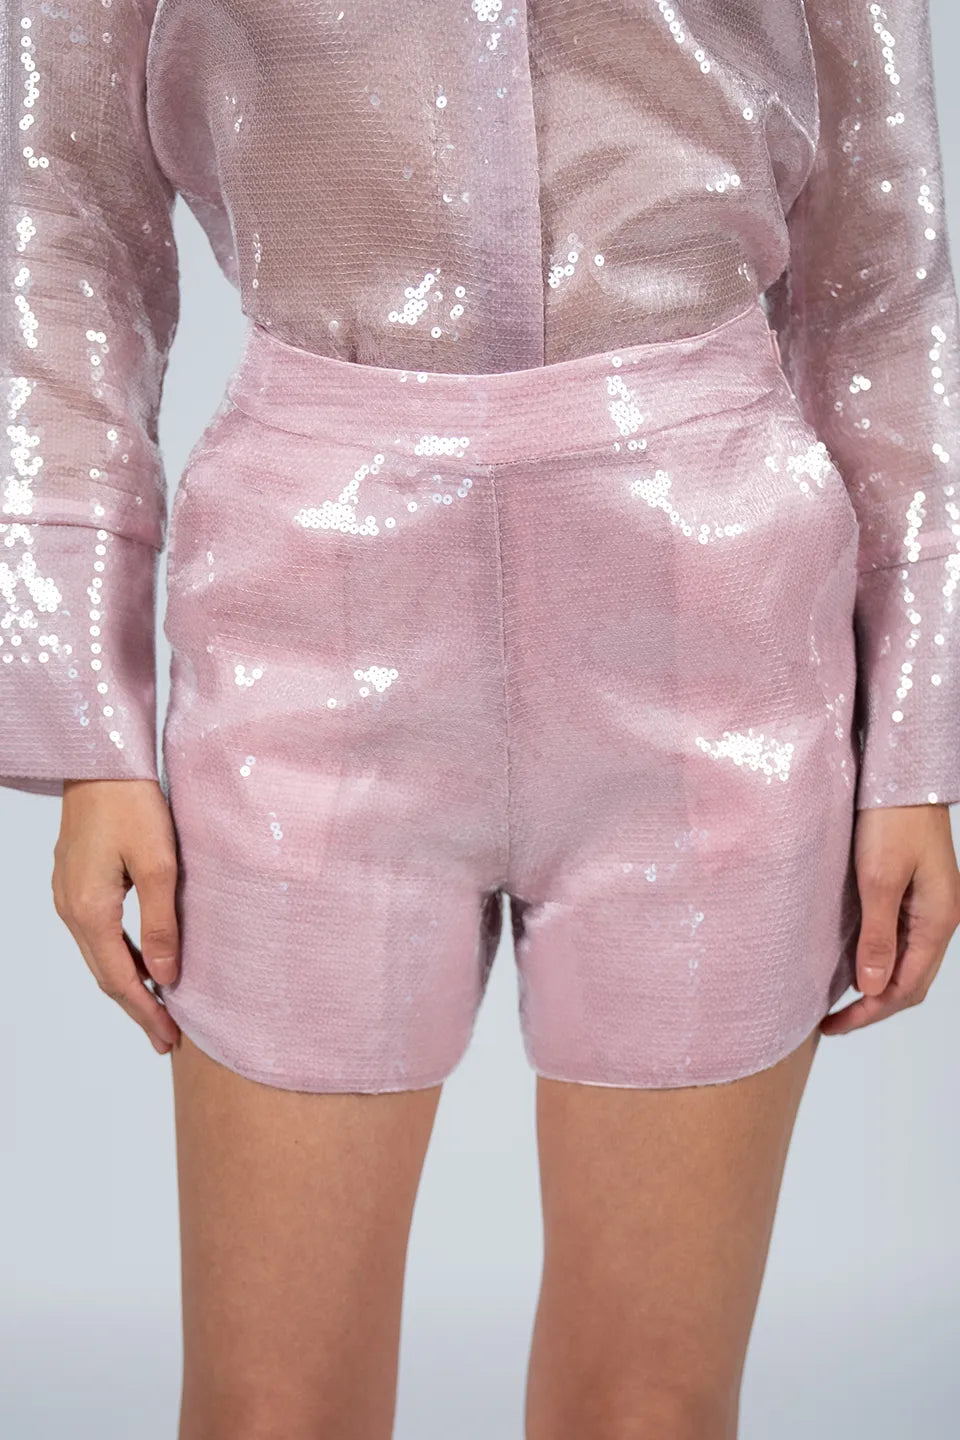 Designer Pink Women shorts, shop online with free delivery in UAE. Product gallery 2